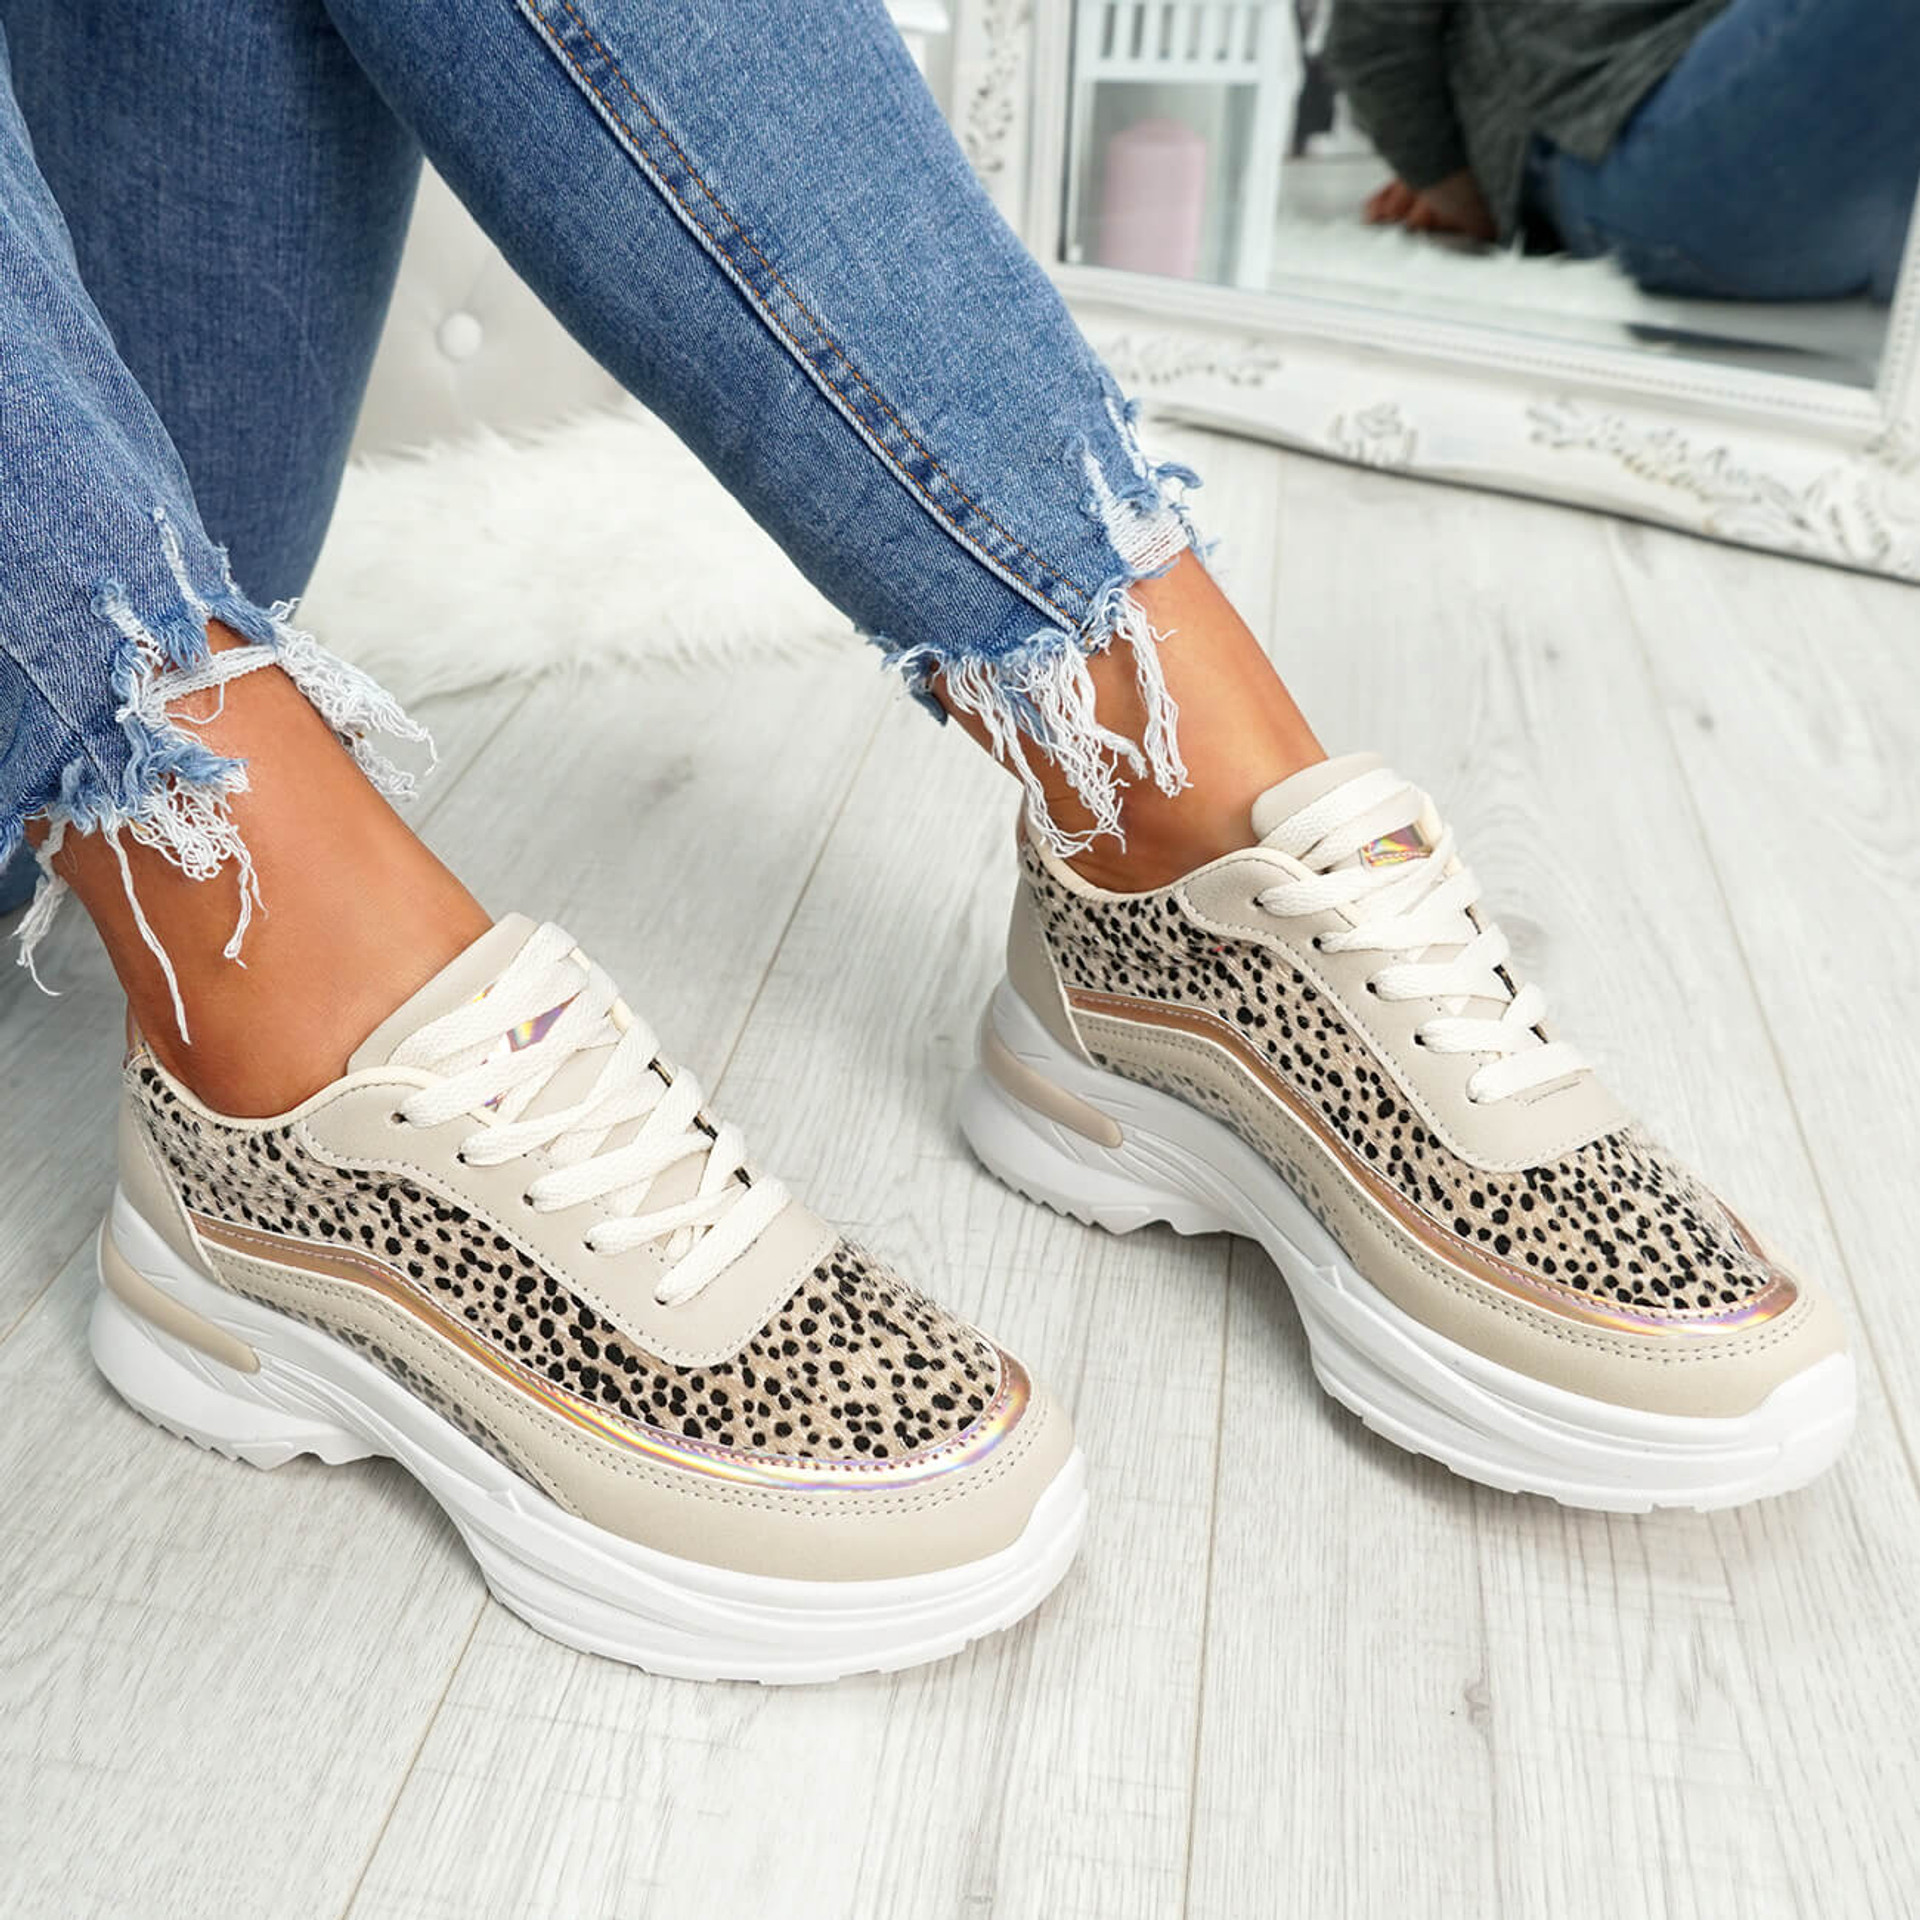 womens beige and white lace-up trainers chunky sole animal print size uk 3 4 5 6 7 8